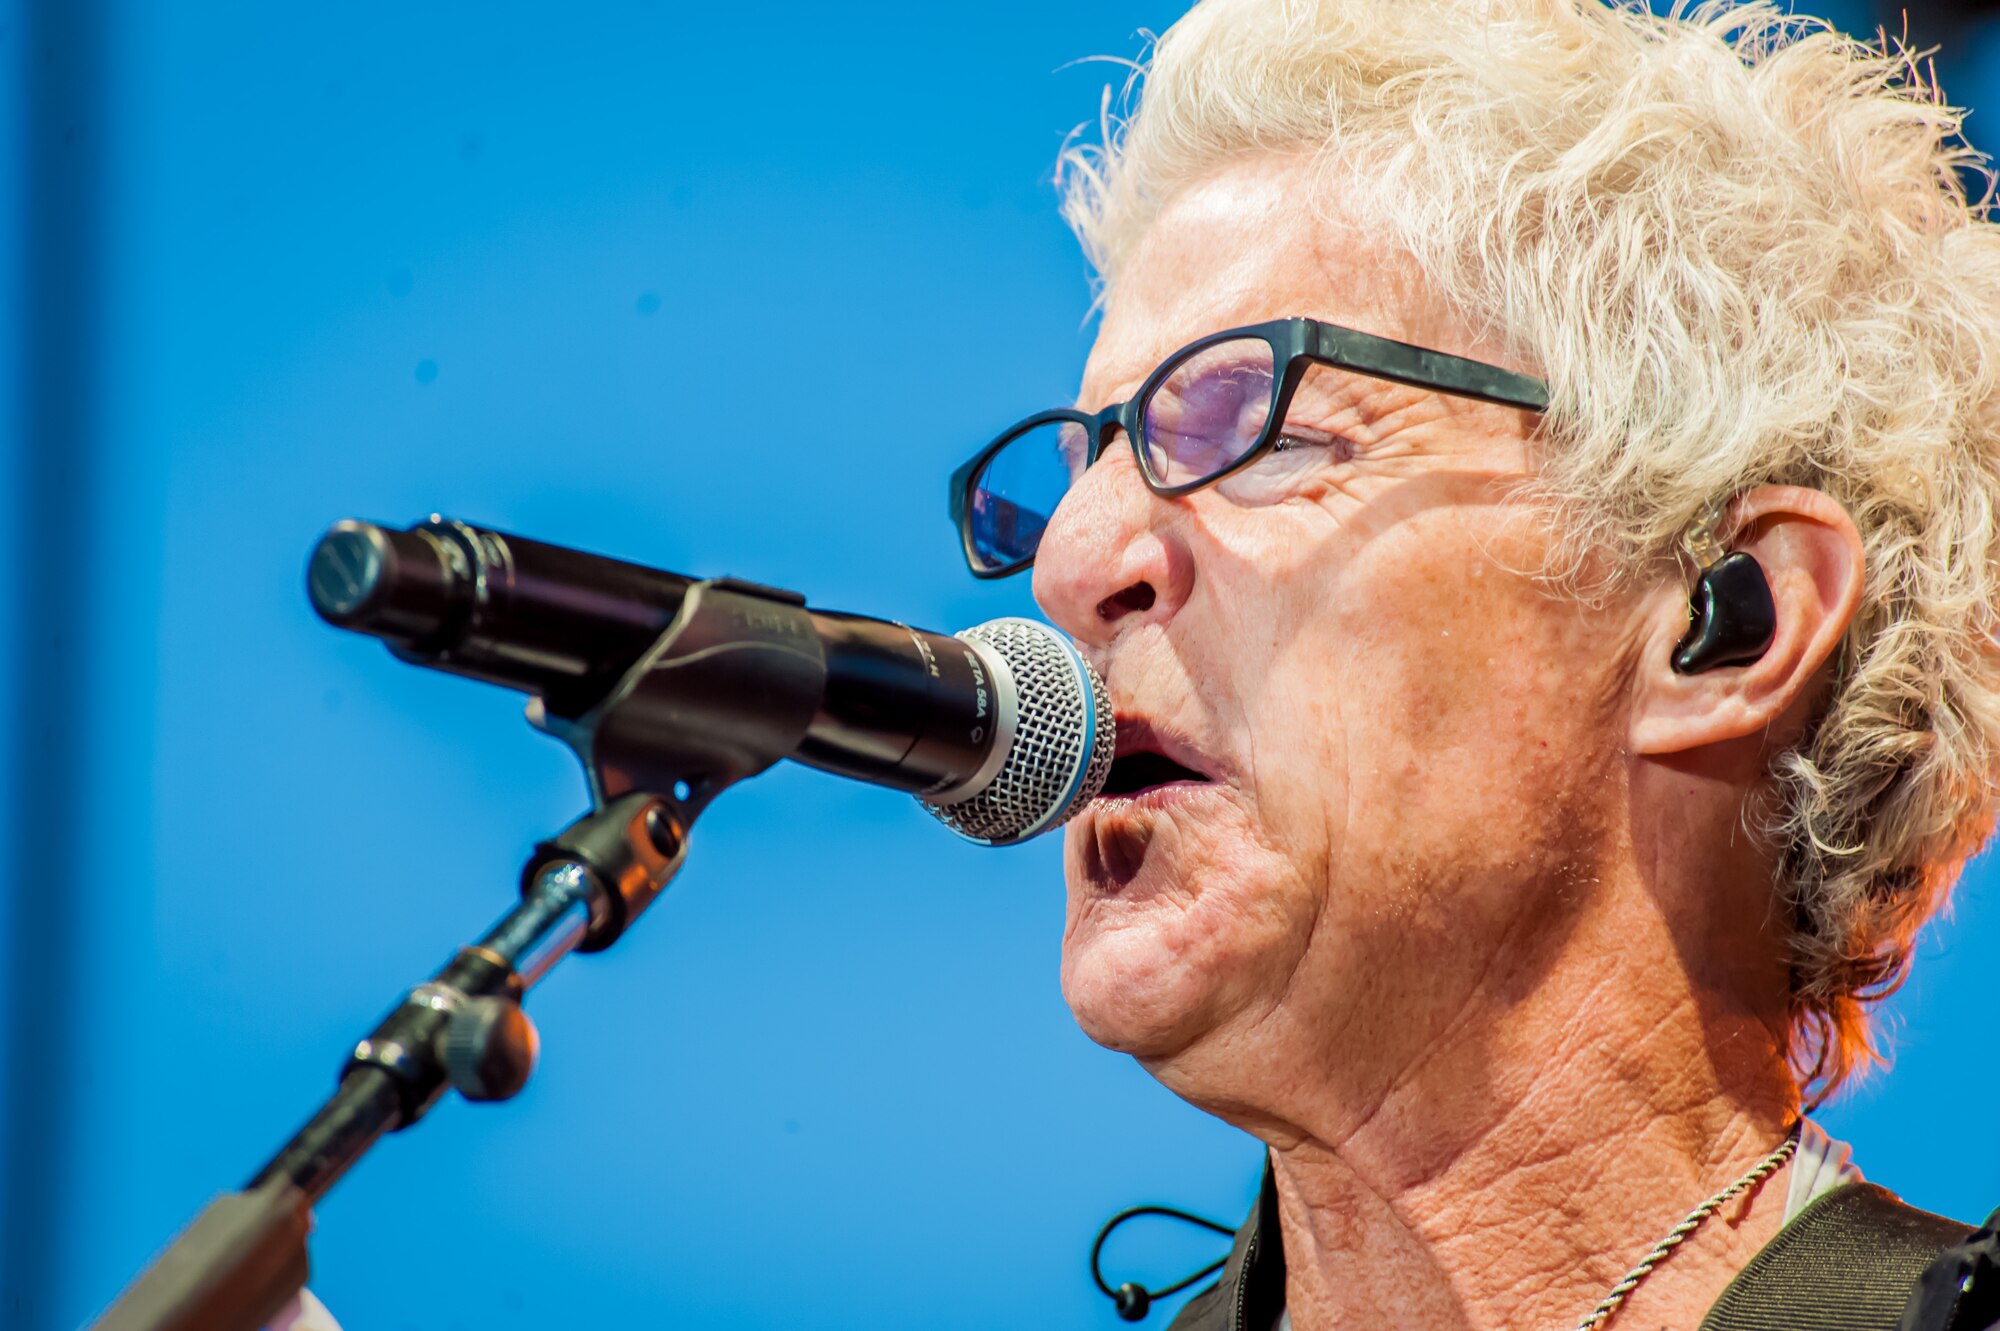 Kevin Cronin, the REO Speedwagon lead vocalist and rhythm guitarist, sings to the Spokane community including America's veterans during a Grandstand performance at the Spokane Interstate Fair in Spokane, Washington, Sept. 11, 2014. REO Speedwagon thanked America’s veterans and families, both past and present, for their service and sacrifice in the name of freedom. Total force Airmen from around the globe took time to commemorate the 13th anniversary of Sept. 11, 2001, with everything from commemorative runs, to tributes and moments of silence. (U.S. Air Force photo by Staff Sgt. Benjamin W. Stratton/Released)